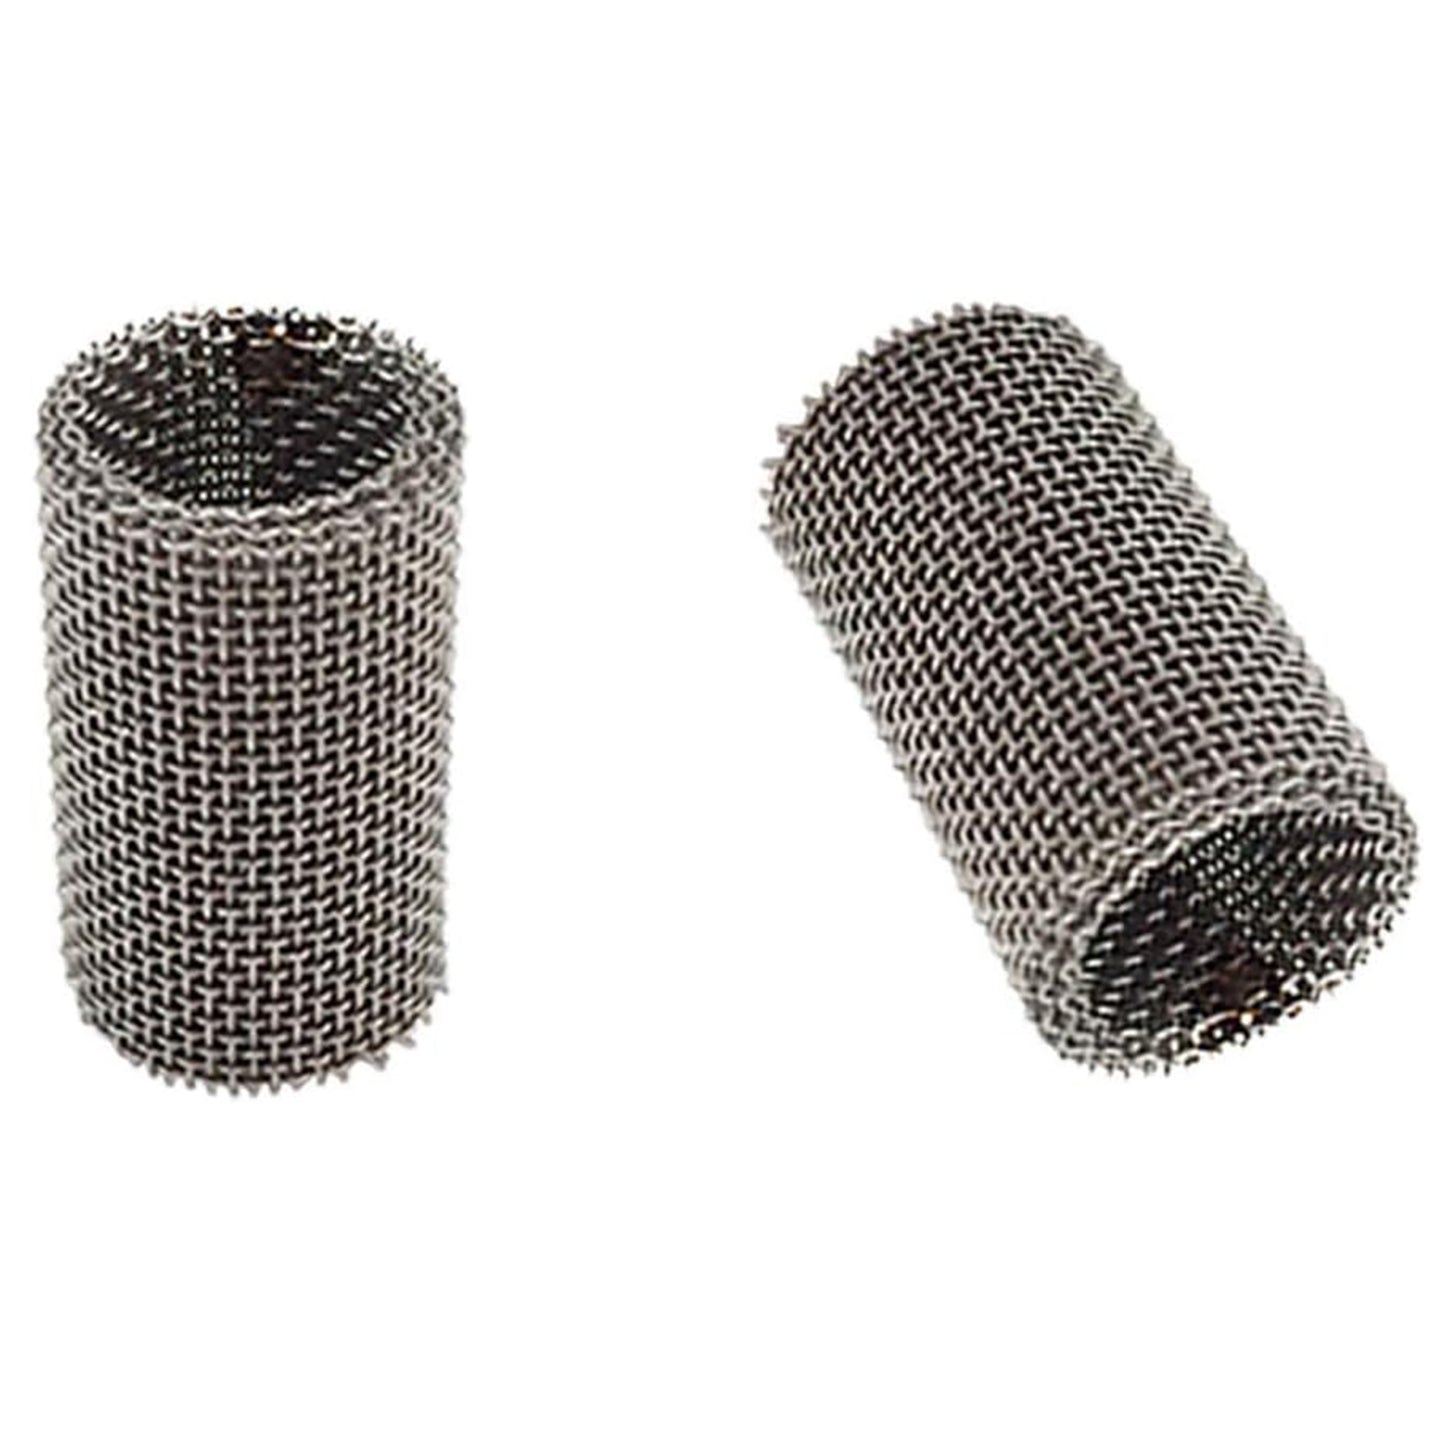 10X 252069100102 Heater Glow Plug Strainer Screen Compatible with Eberspacher Heater Airtronic D2 D4 D4S